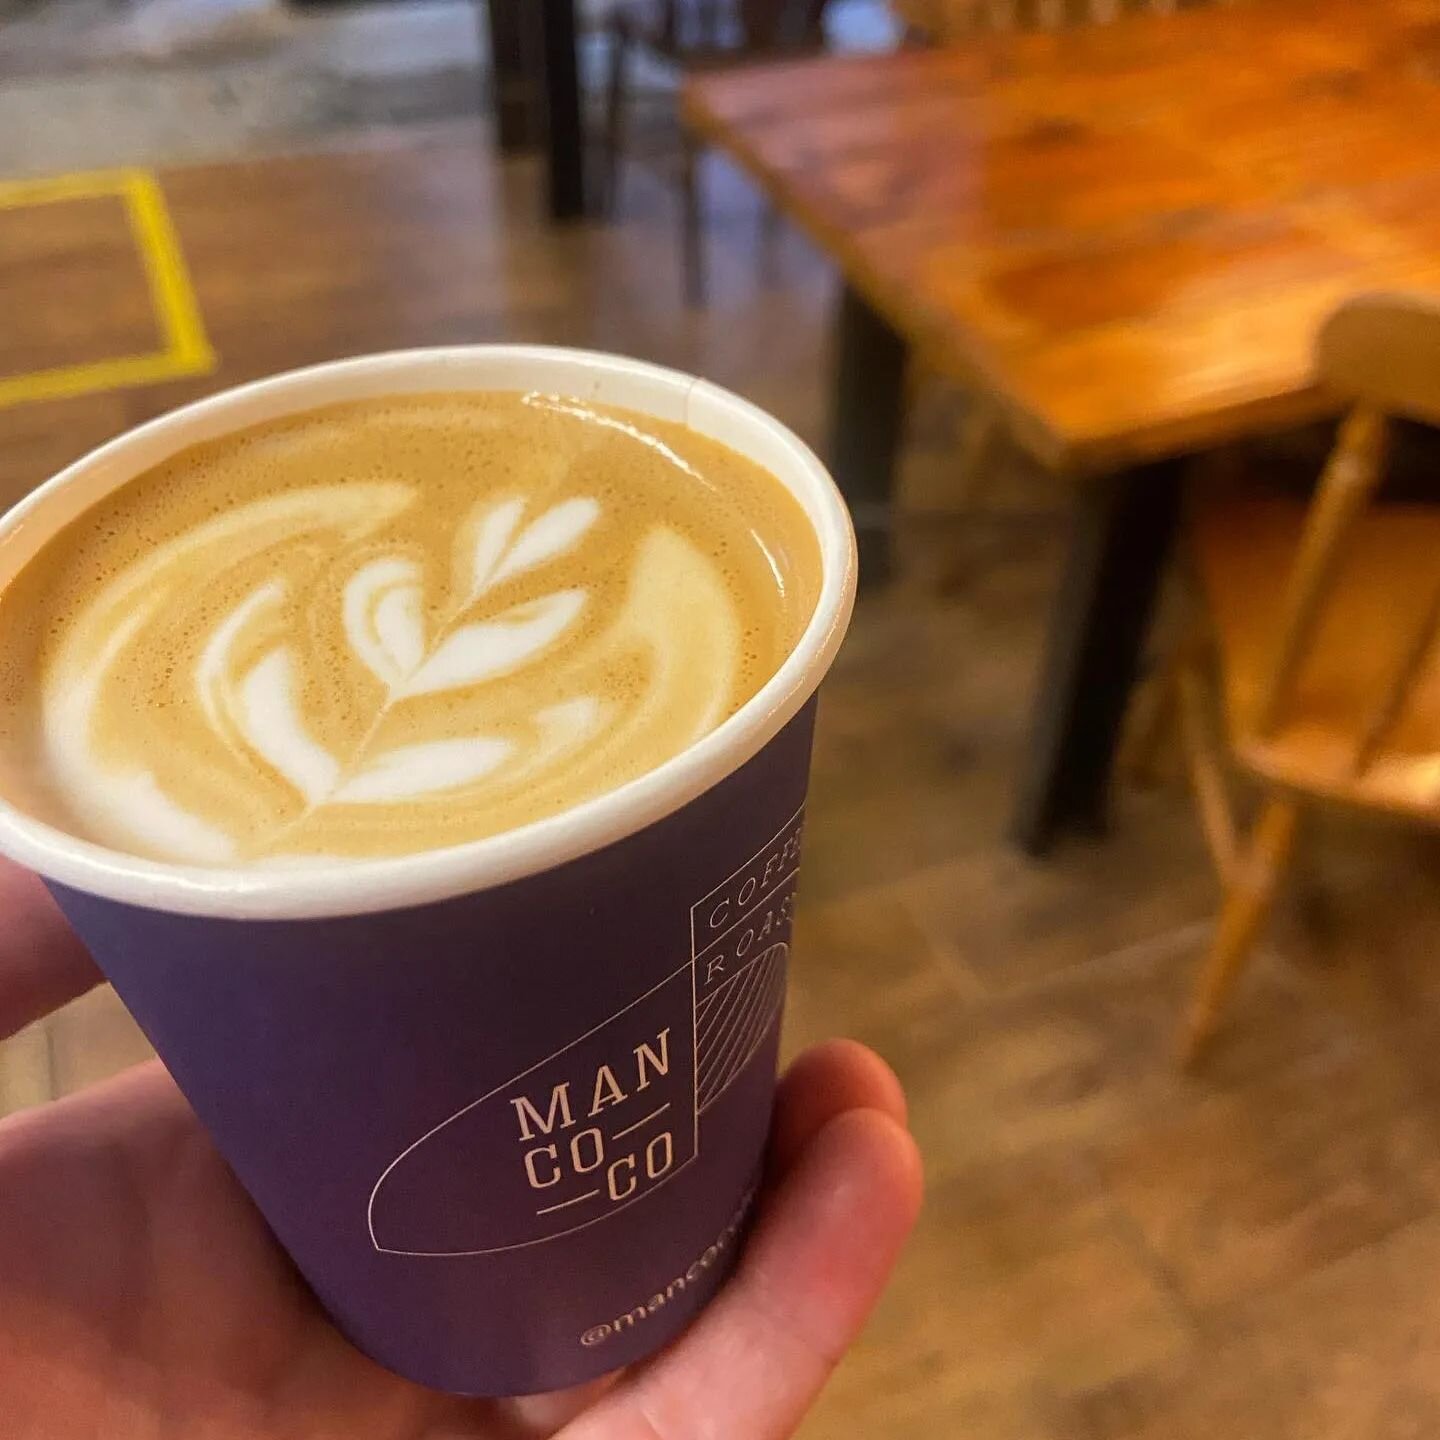 Monday morning coffee to go? We've got you covered!

Premium beans selected and roasted by @mancocoltd 

Cappuccino, latte, flat white, Americano, espresso - you name it, we'll craft it.

Decaf also available.

Don't forget, if you've got your own re